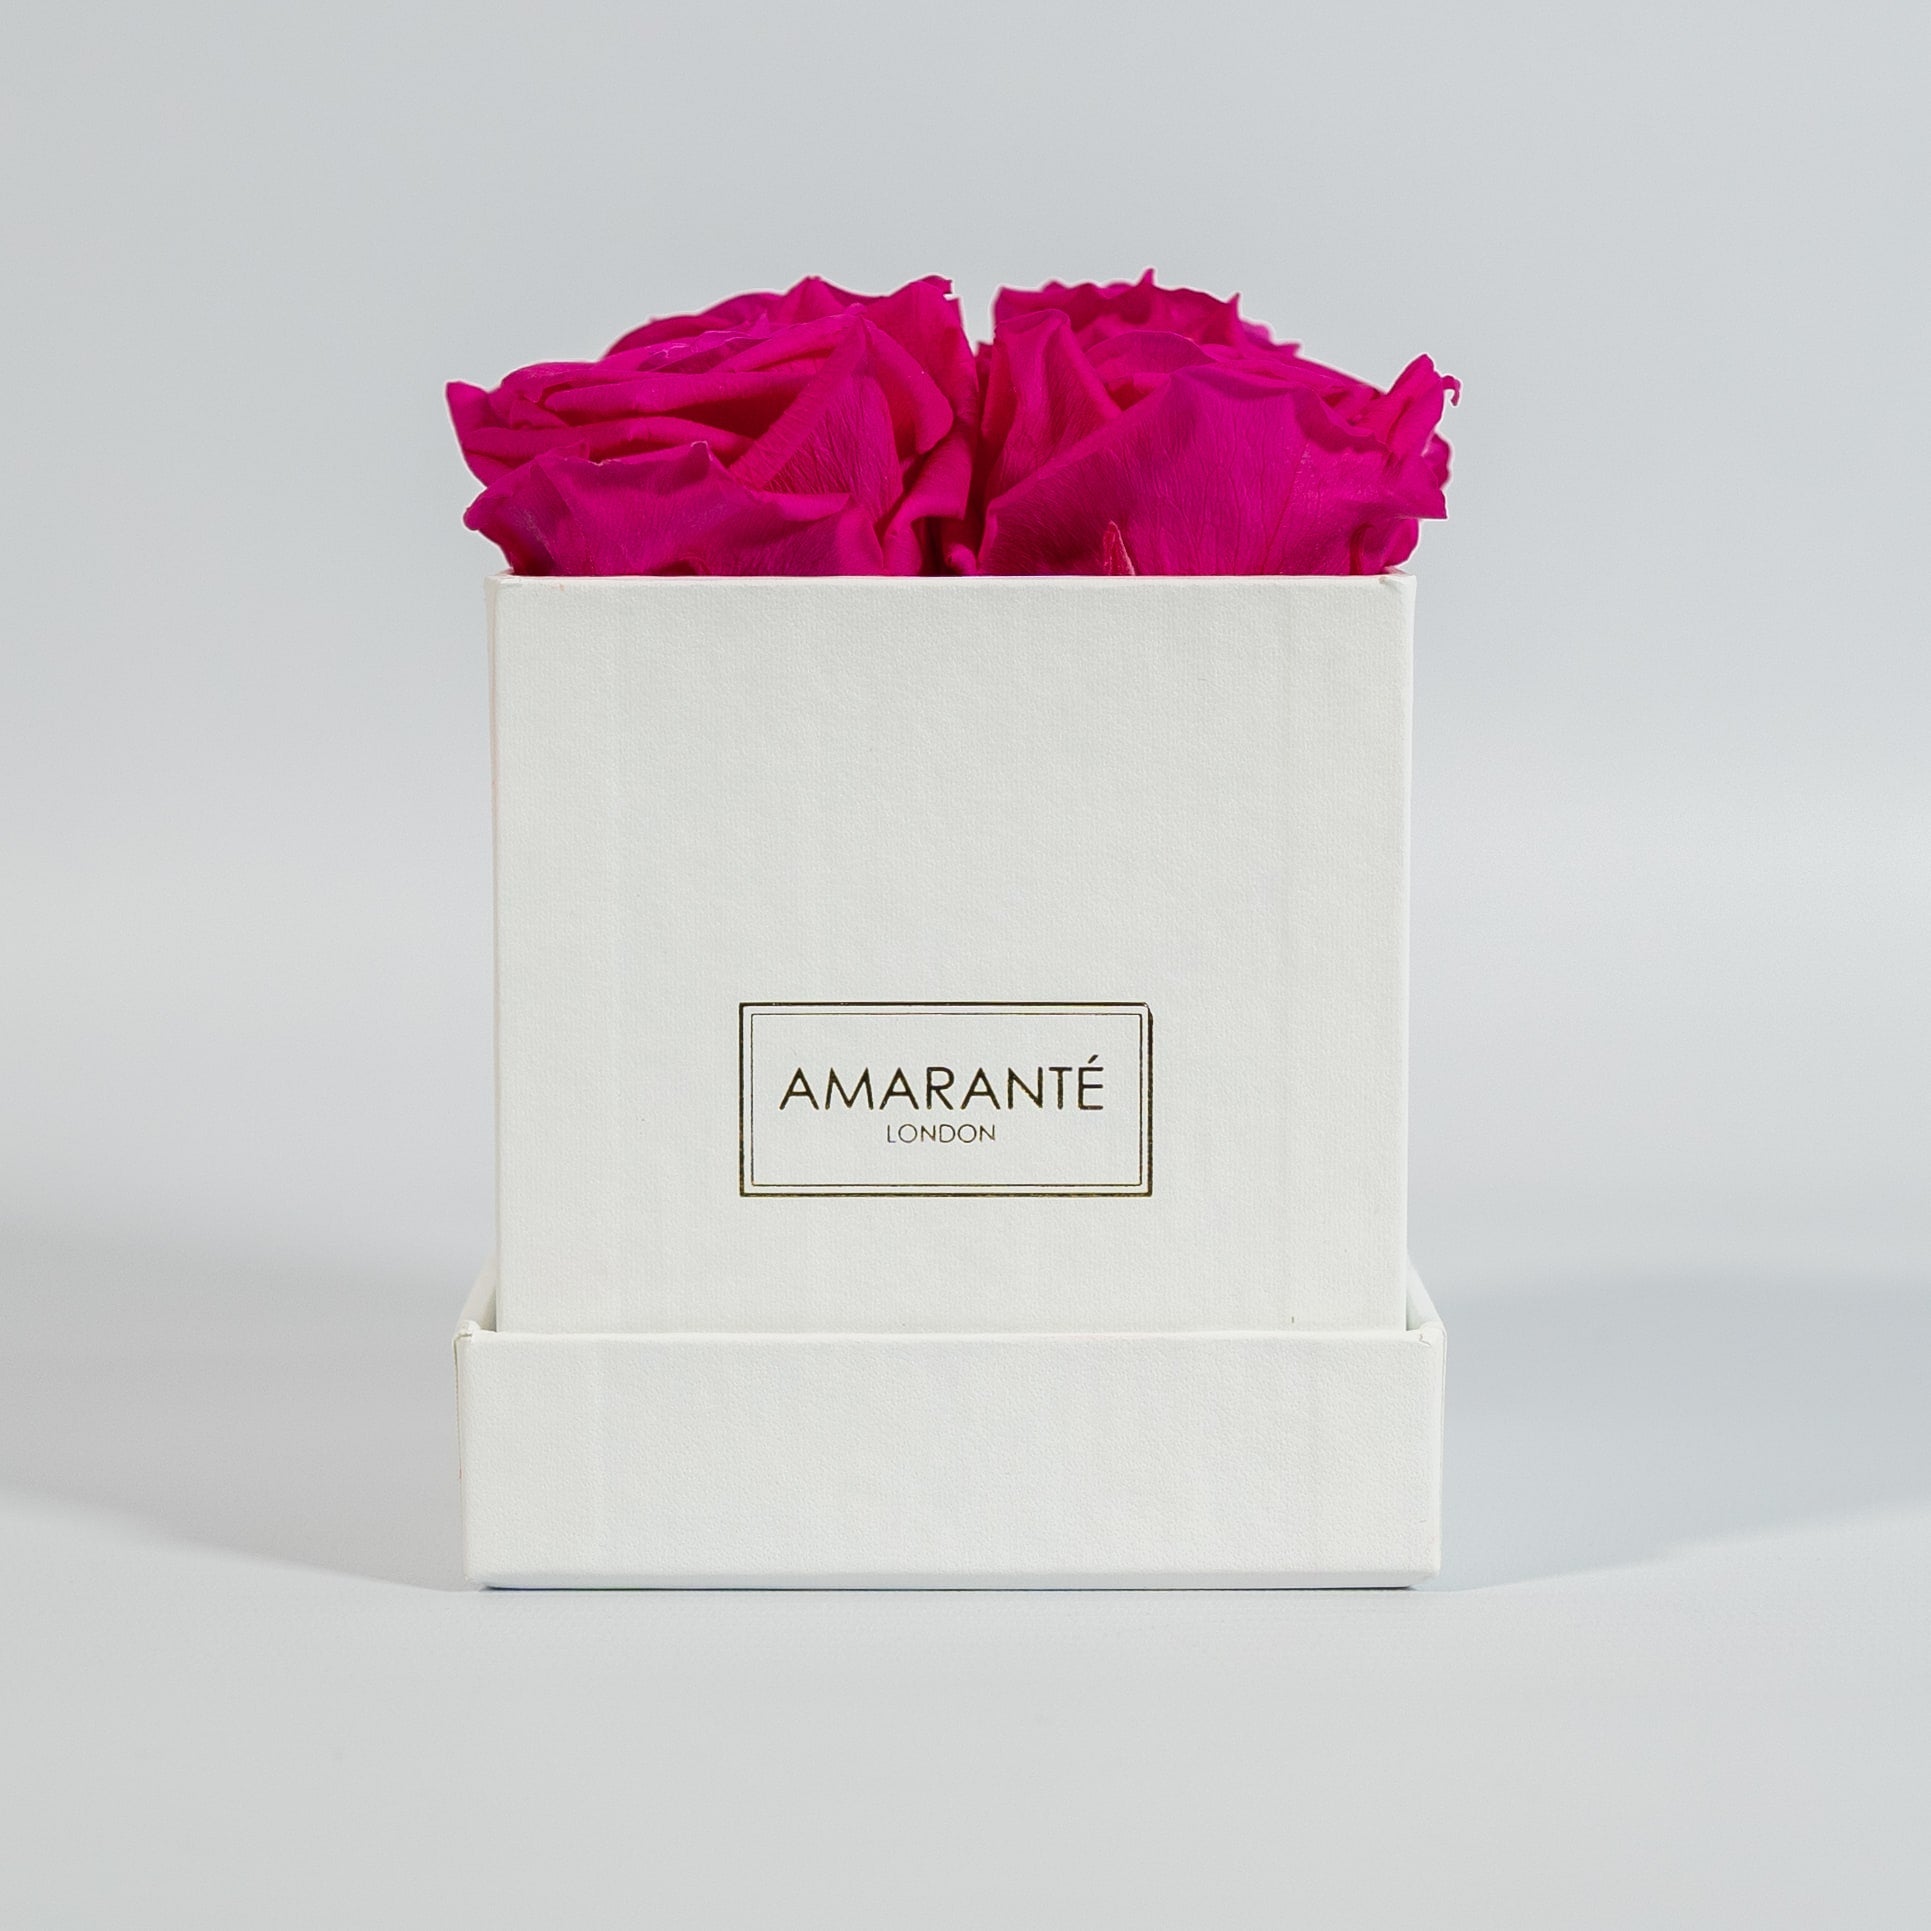 Distinctive hot pink roses displayed in a fashionable white box 